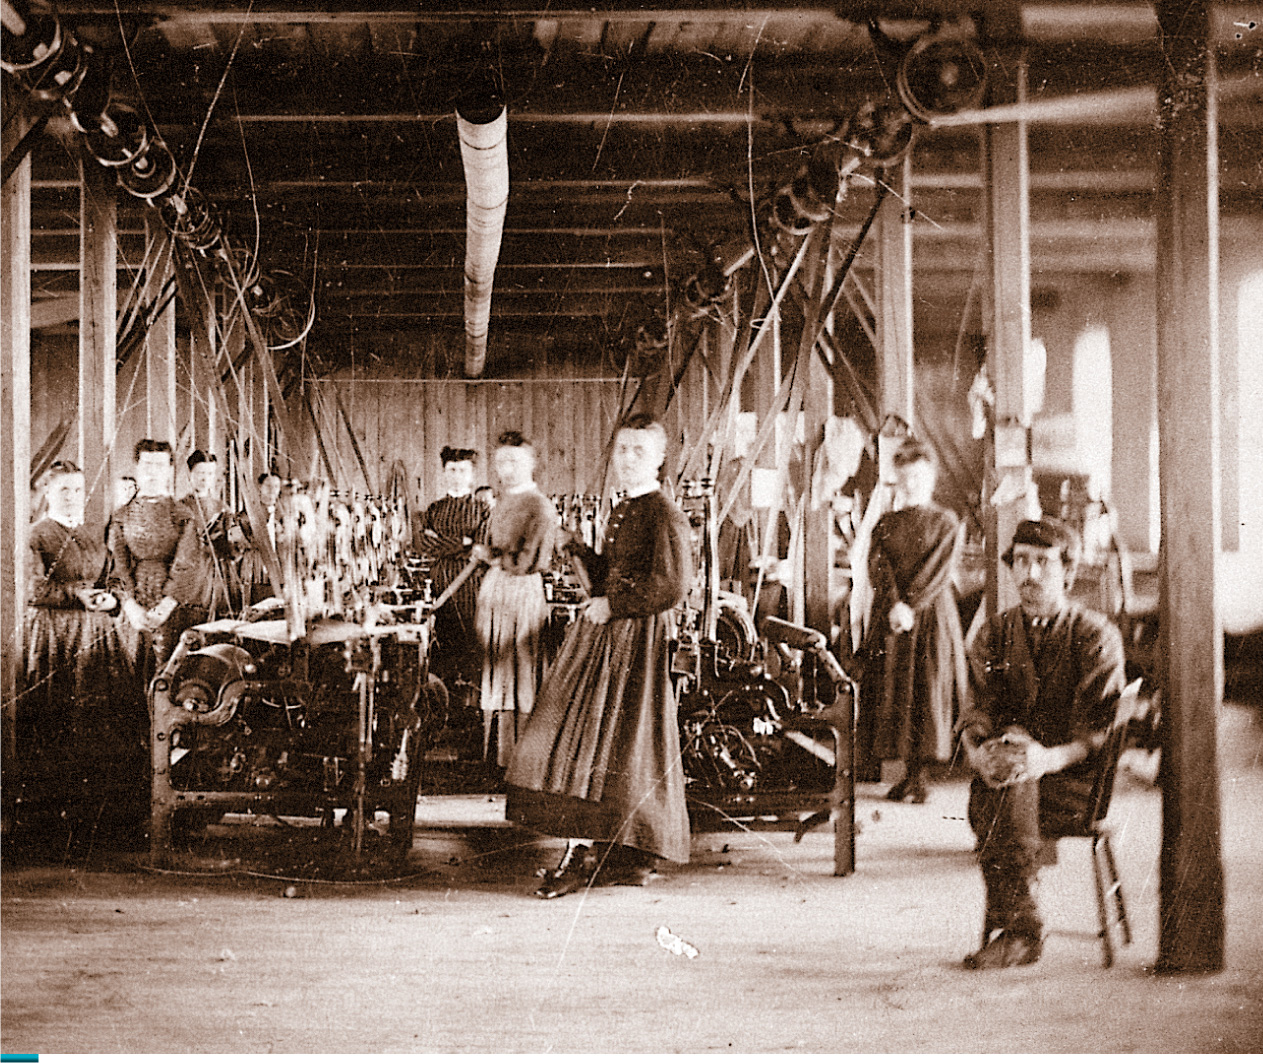 In a photo of a mill, women
workers stand by large textile machines.